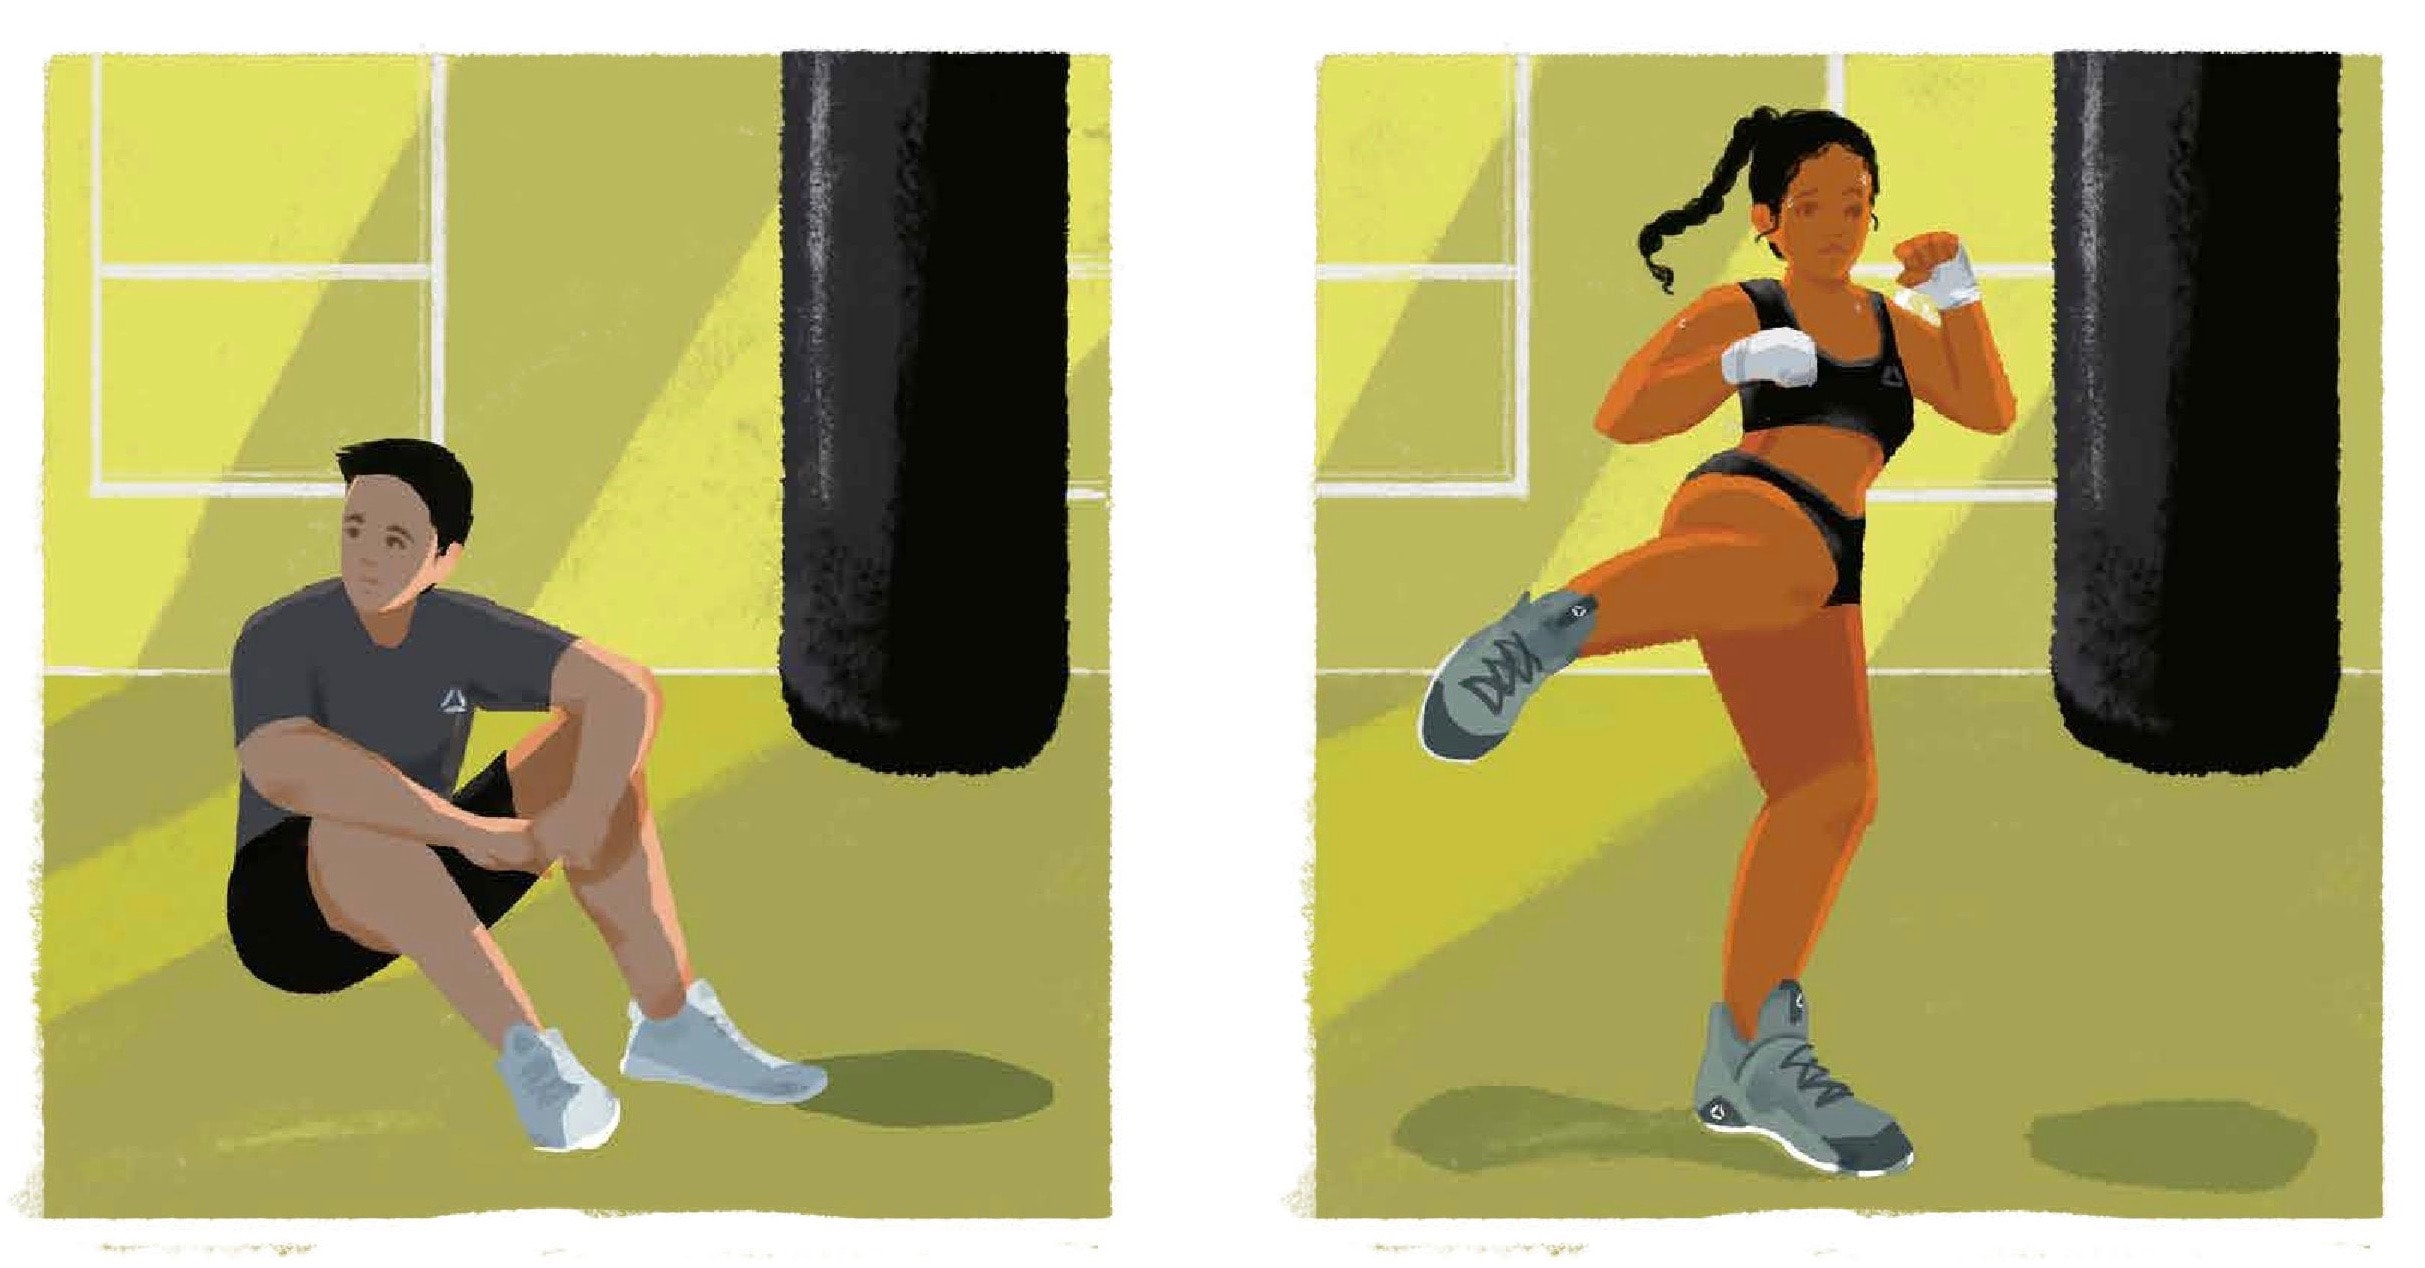 noble-trainer-illustrations-boxing